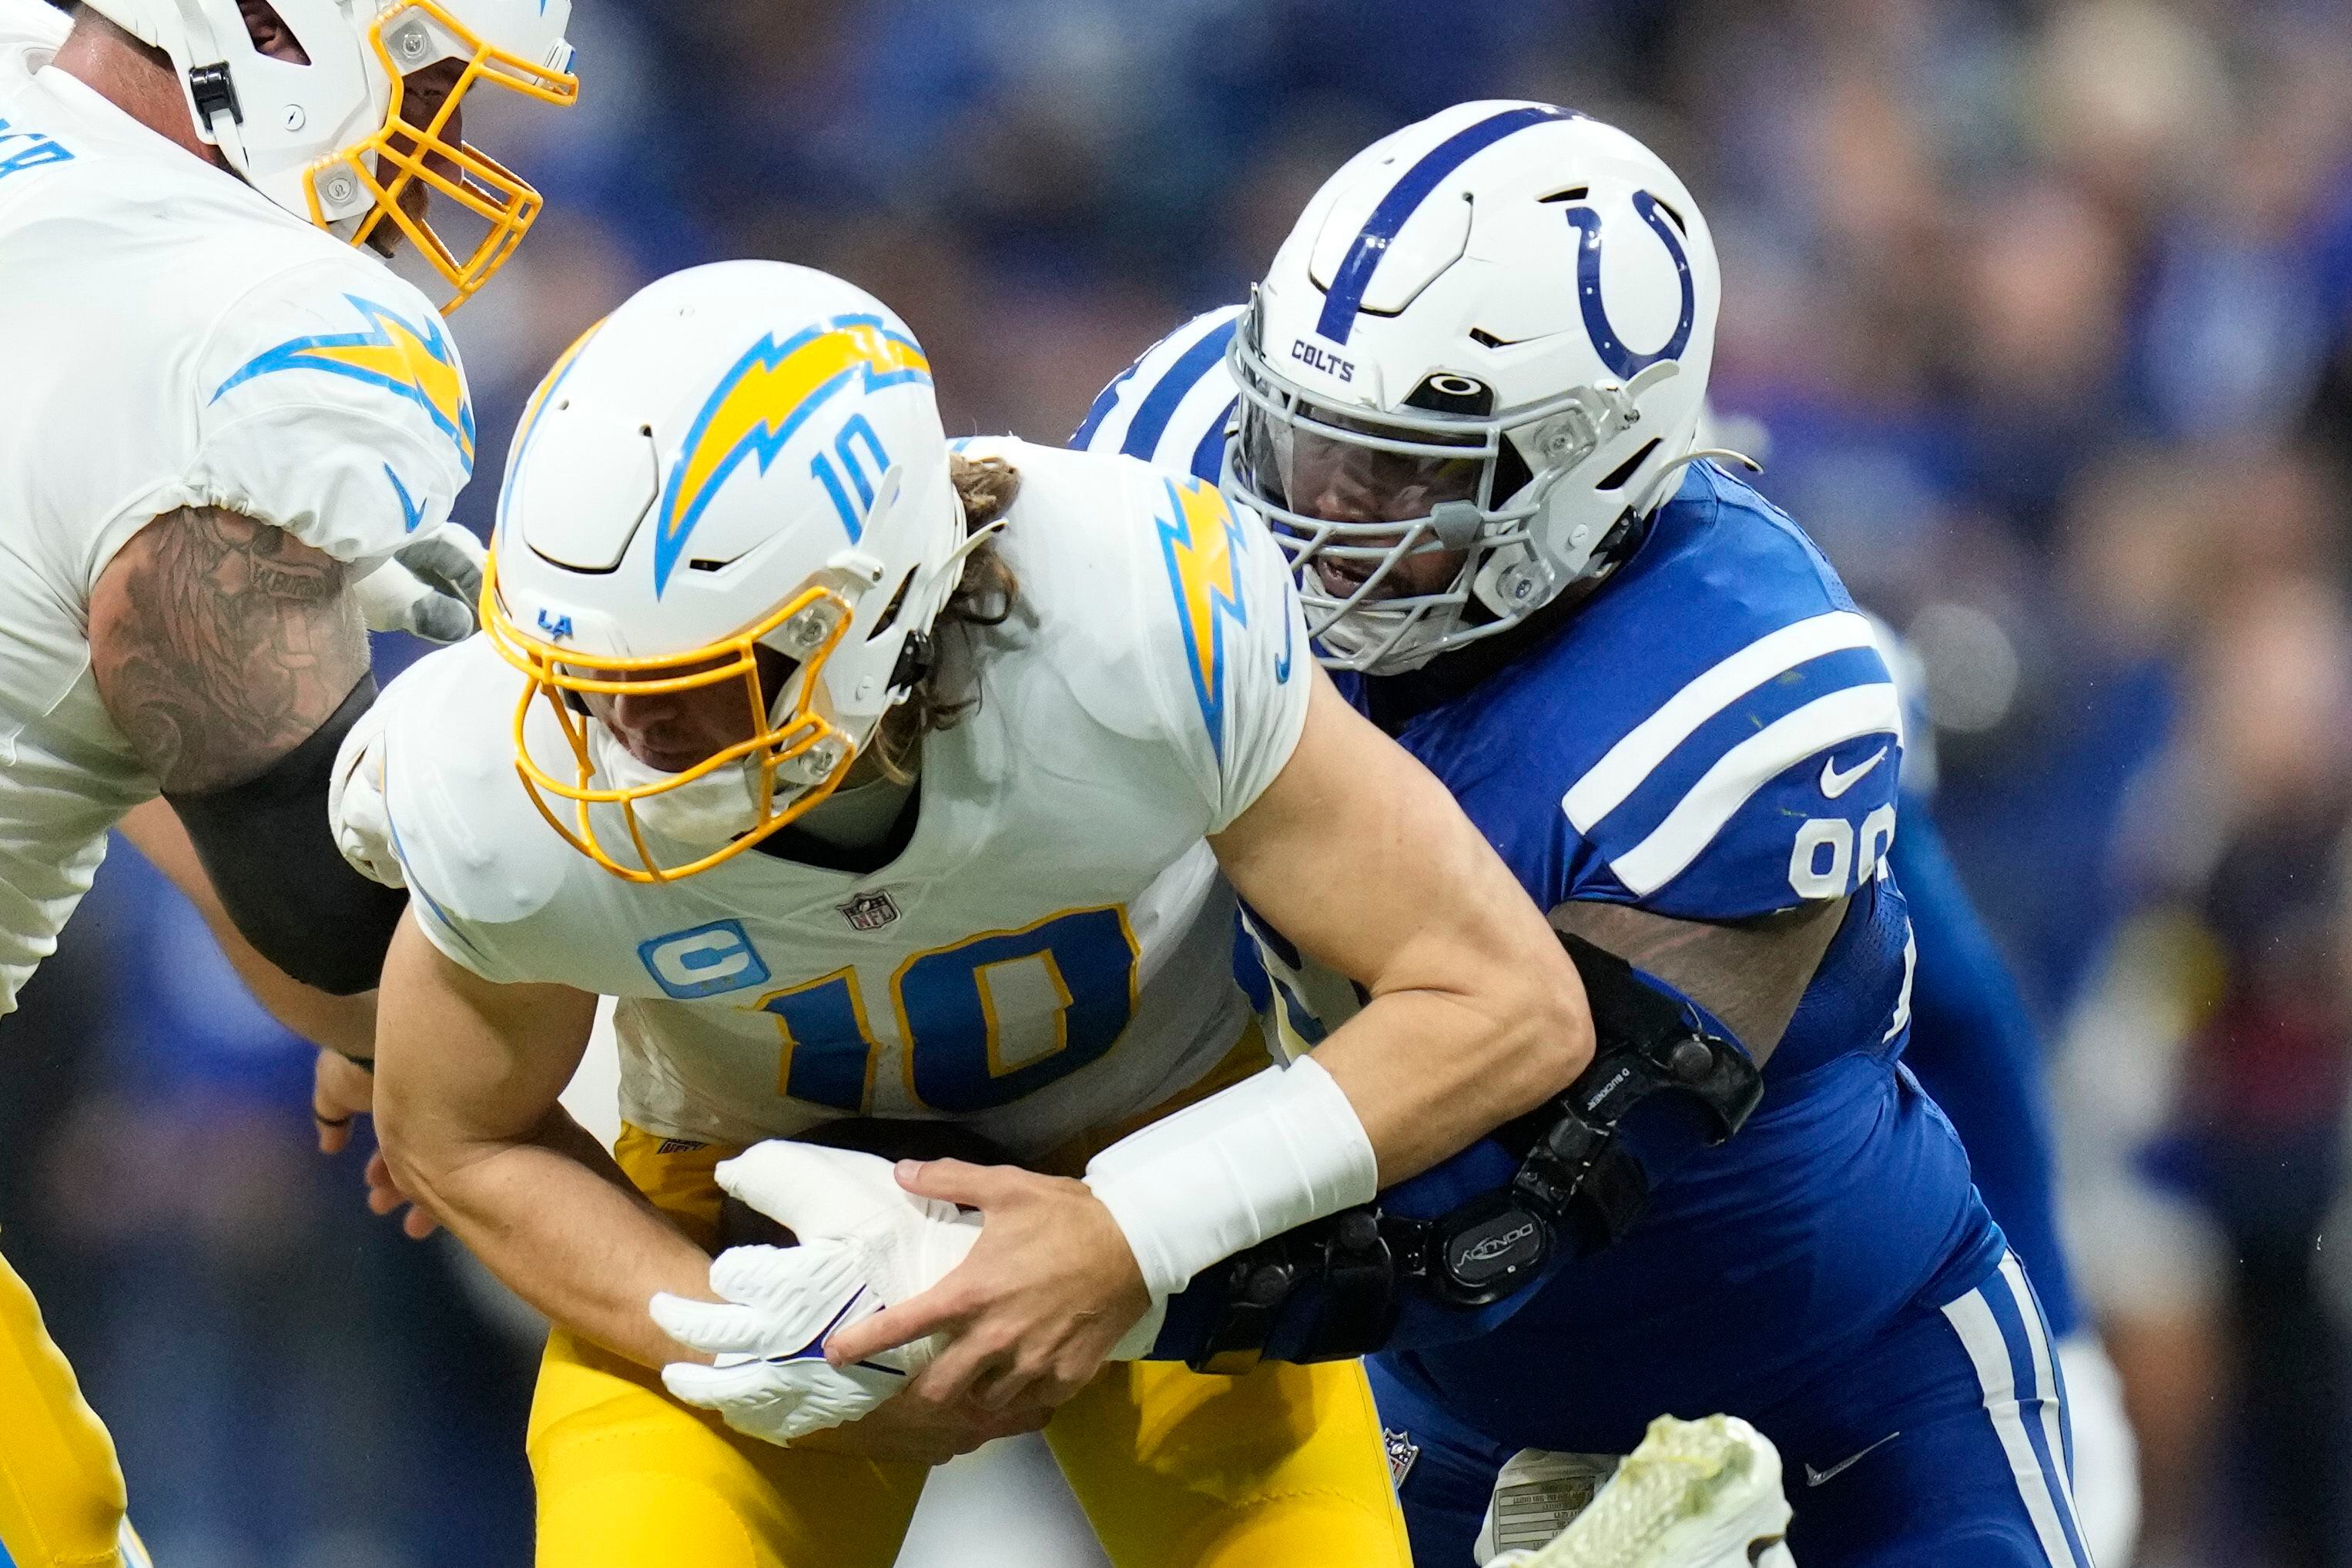 Justin Herbert and Chargers defeat Colts, clinch playoff spot